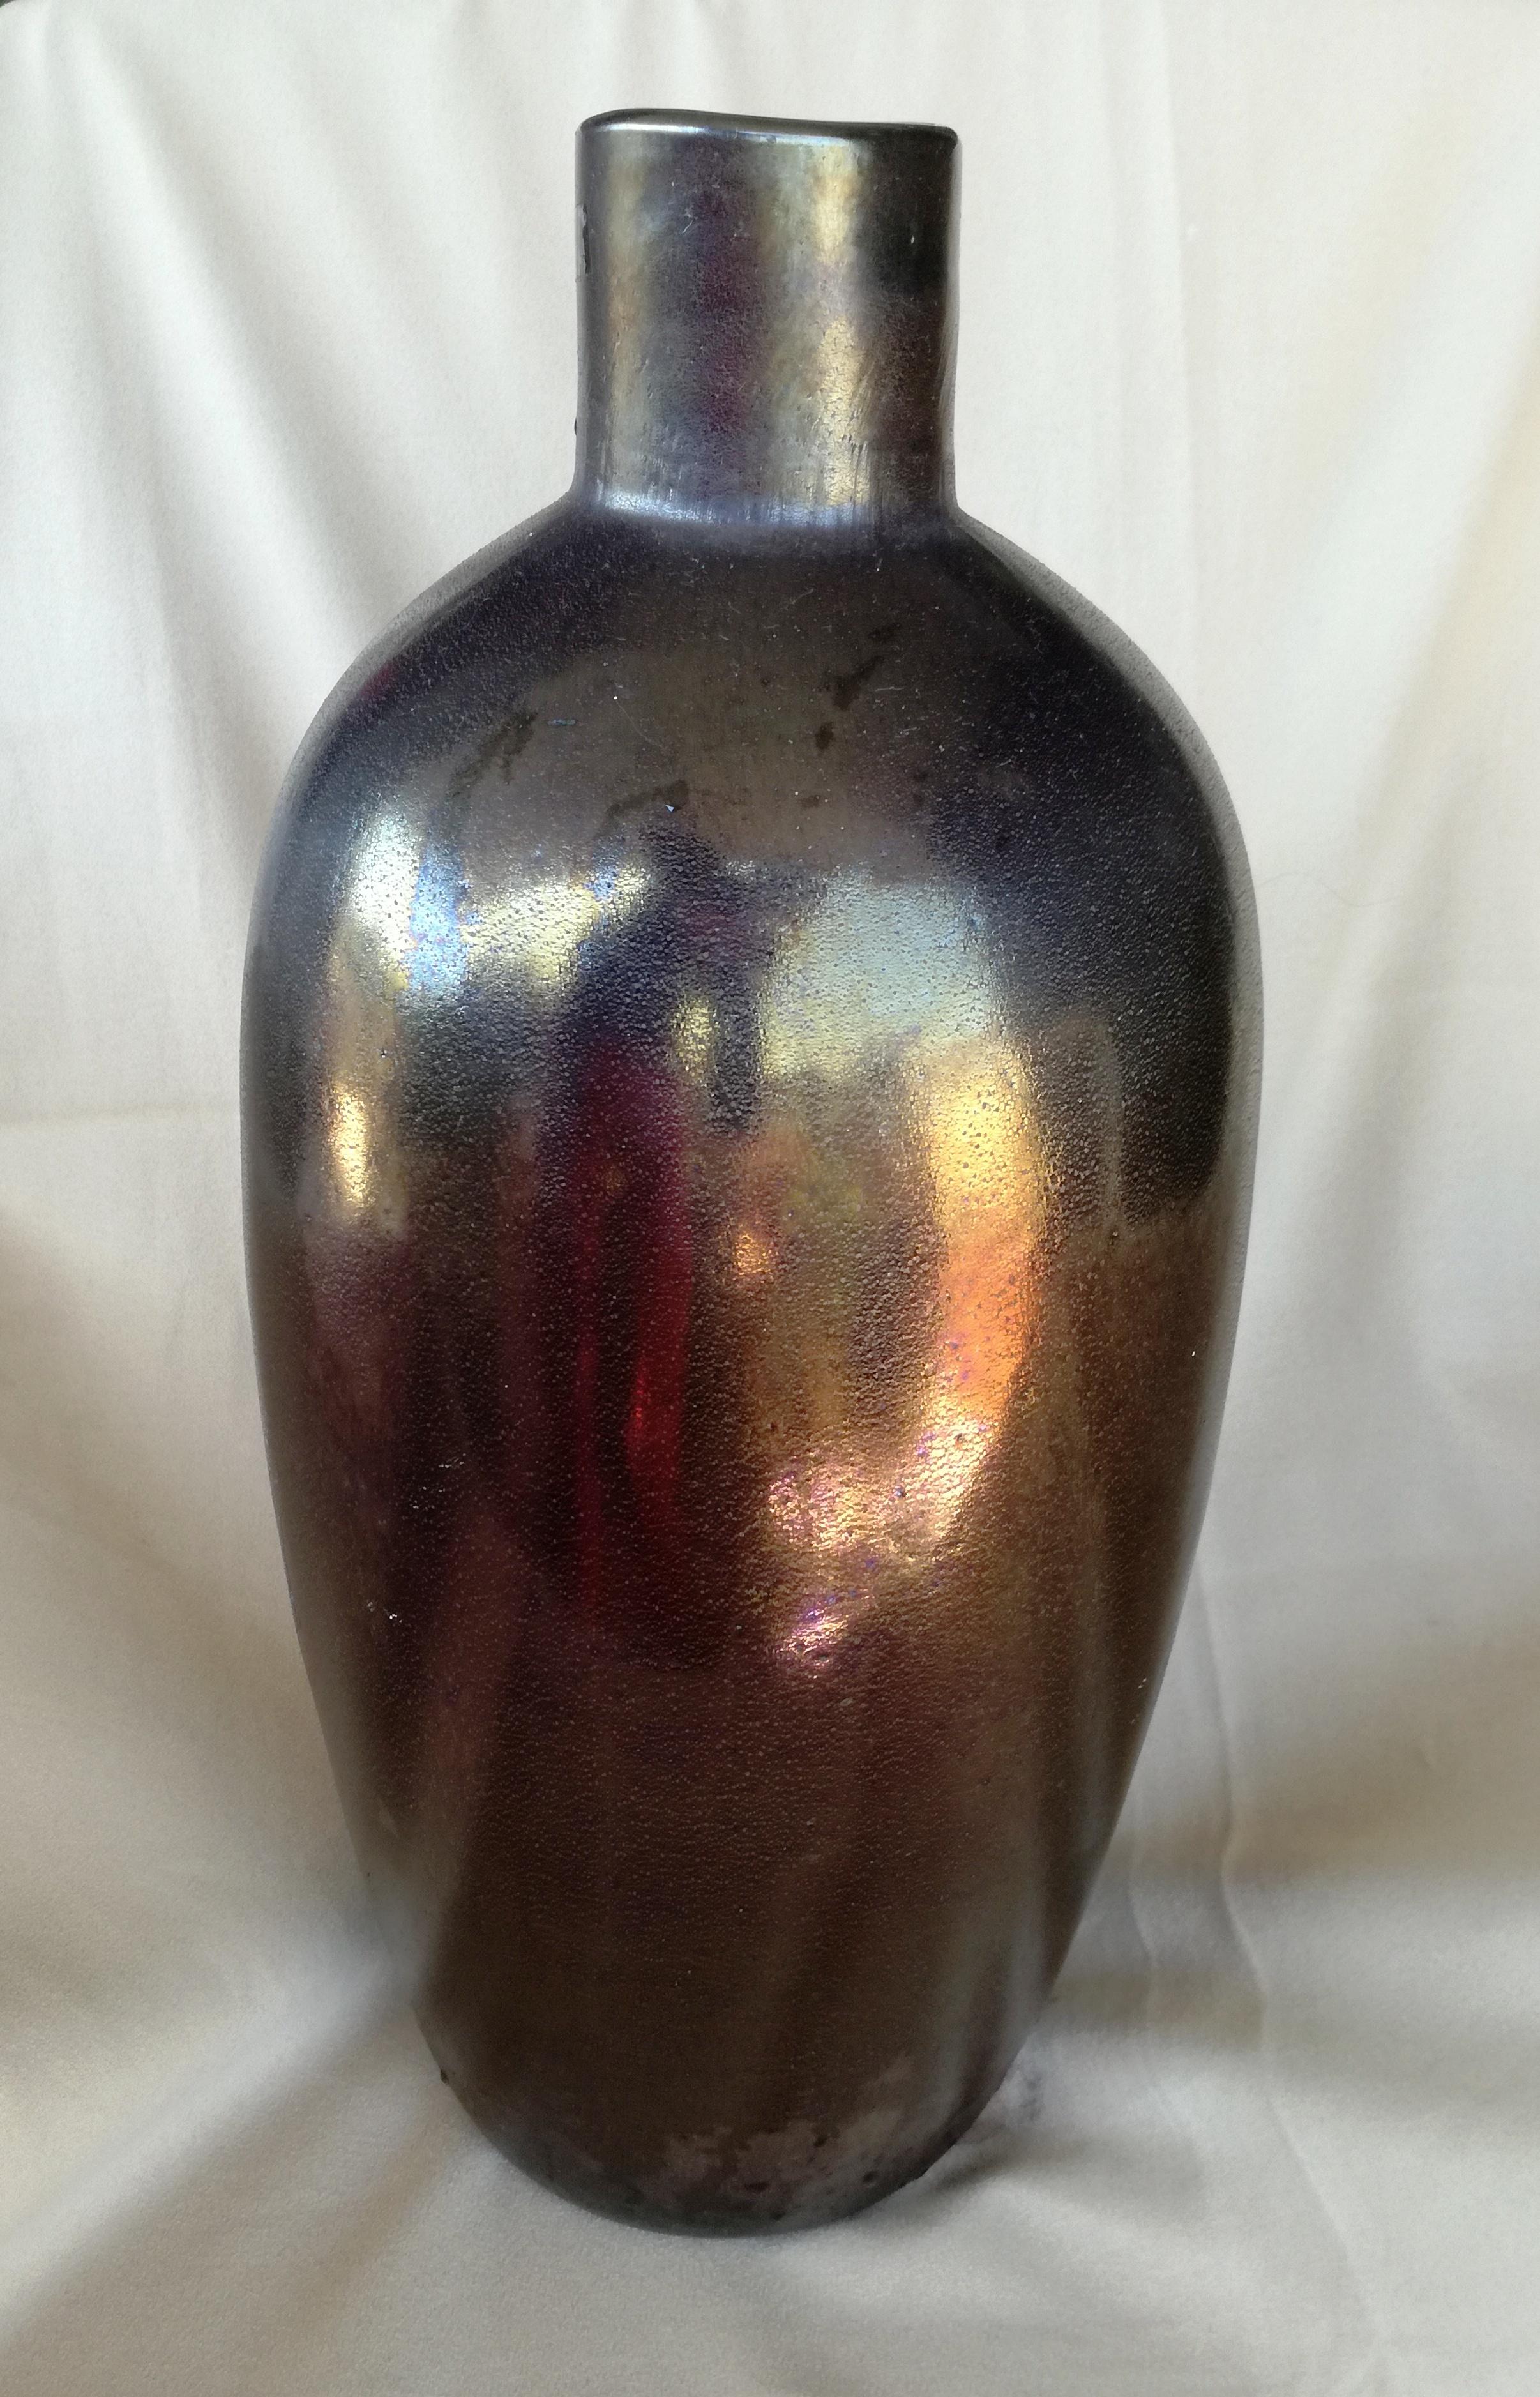 1 bottle 1990s, Barbini Murano. large bottle/vase, Murano glass, silicon-treated. bottle is heavy solid glass. silicon treatment is on the surface. in the bottom you can see the chromatic overlay processing of oxides to get the brown/bordeaux color